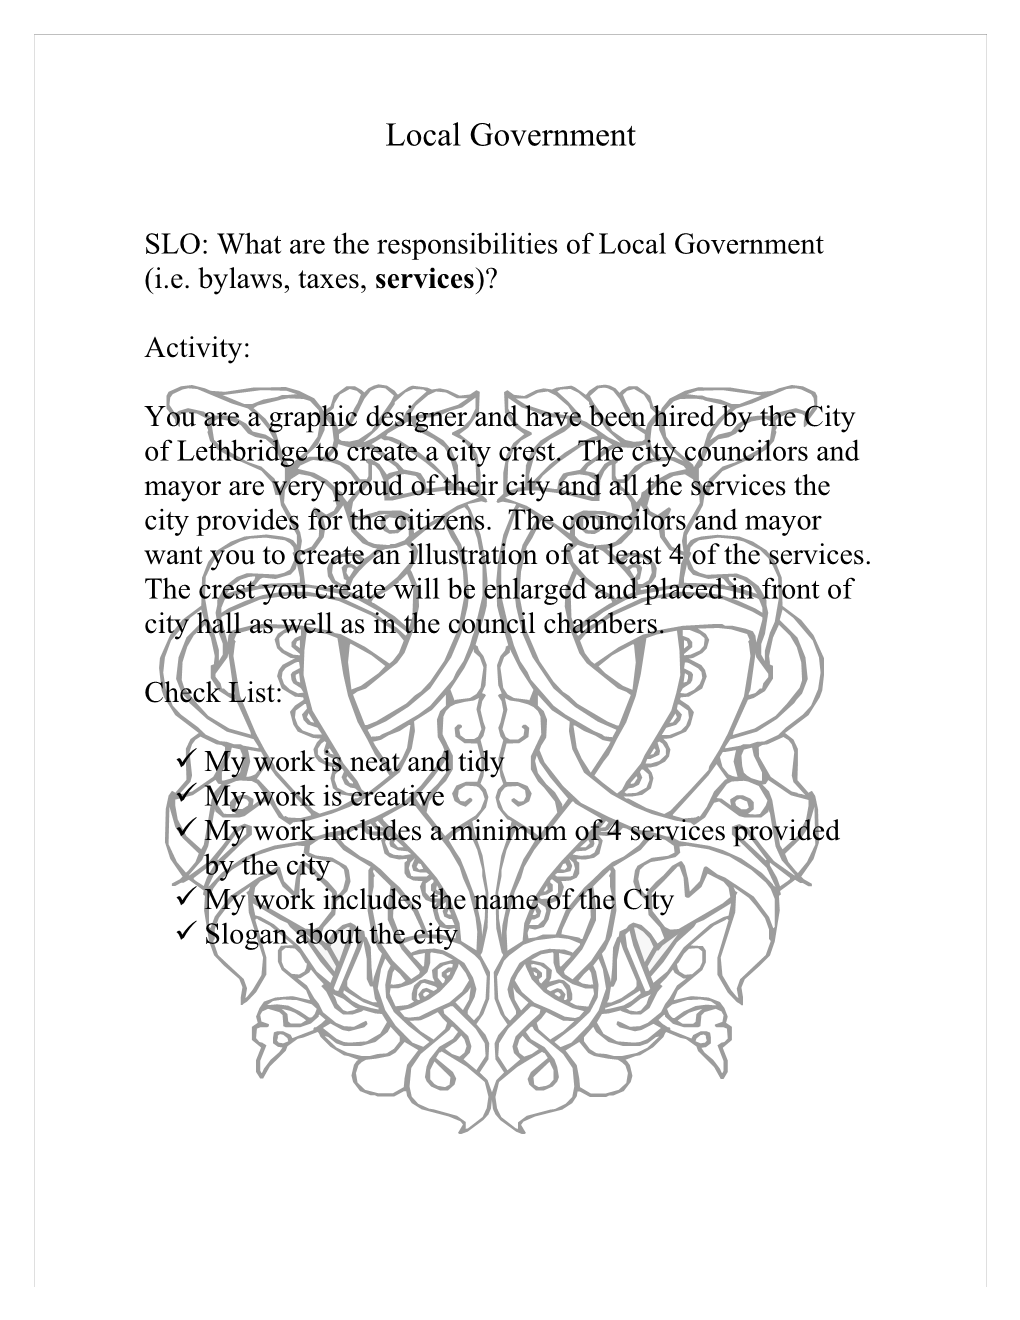 SLO: What Are the Responsibilities of Local Government (I.E. Bylaws, Taxes, Services)?